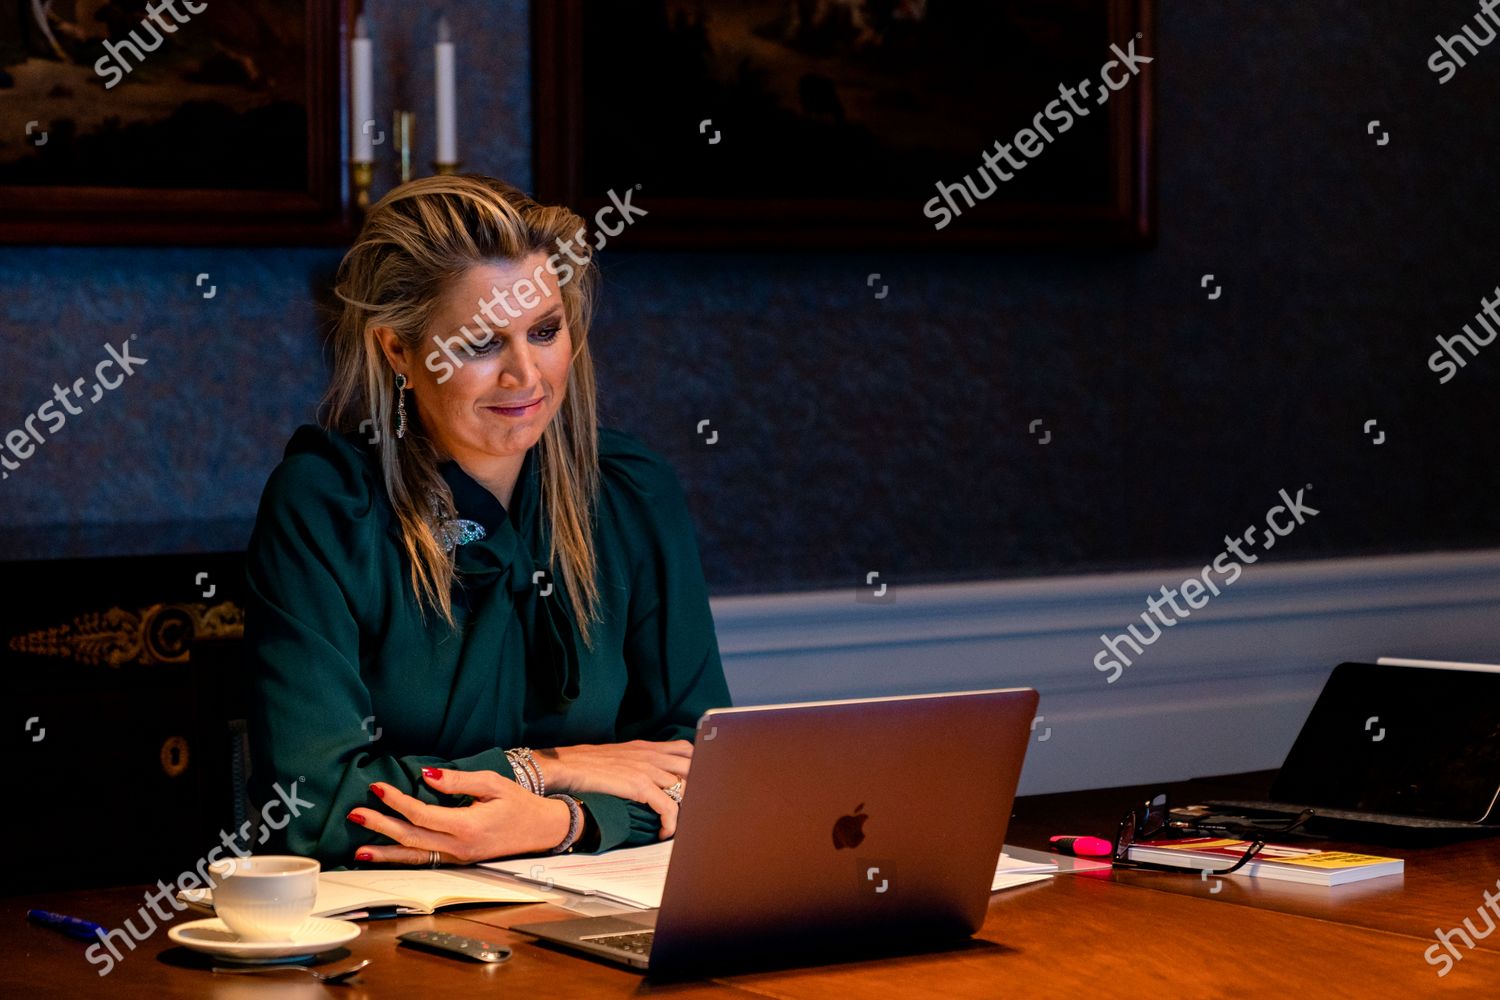 queen-maxima-video-conference-the-hague-the-netherlands-shutterstock-editorial-11086765m.jpg